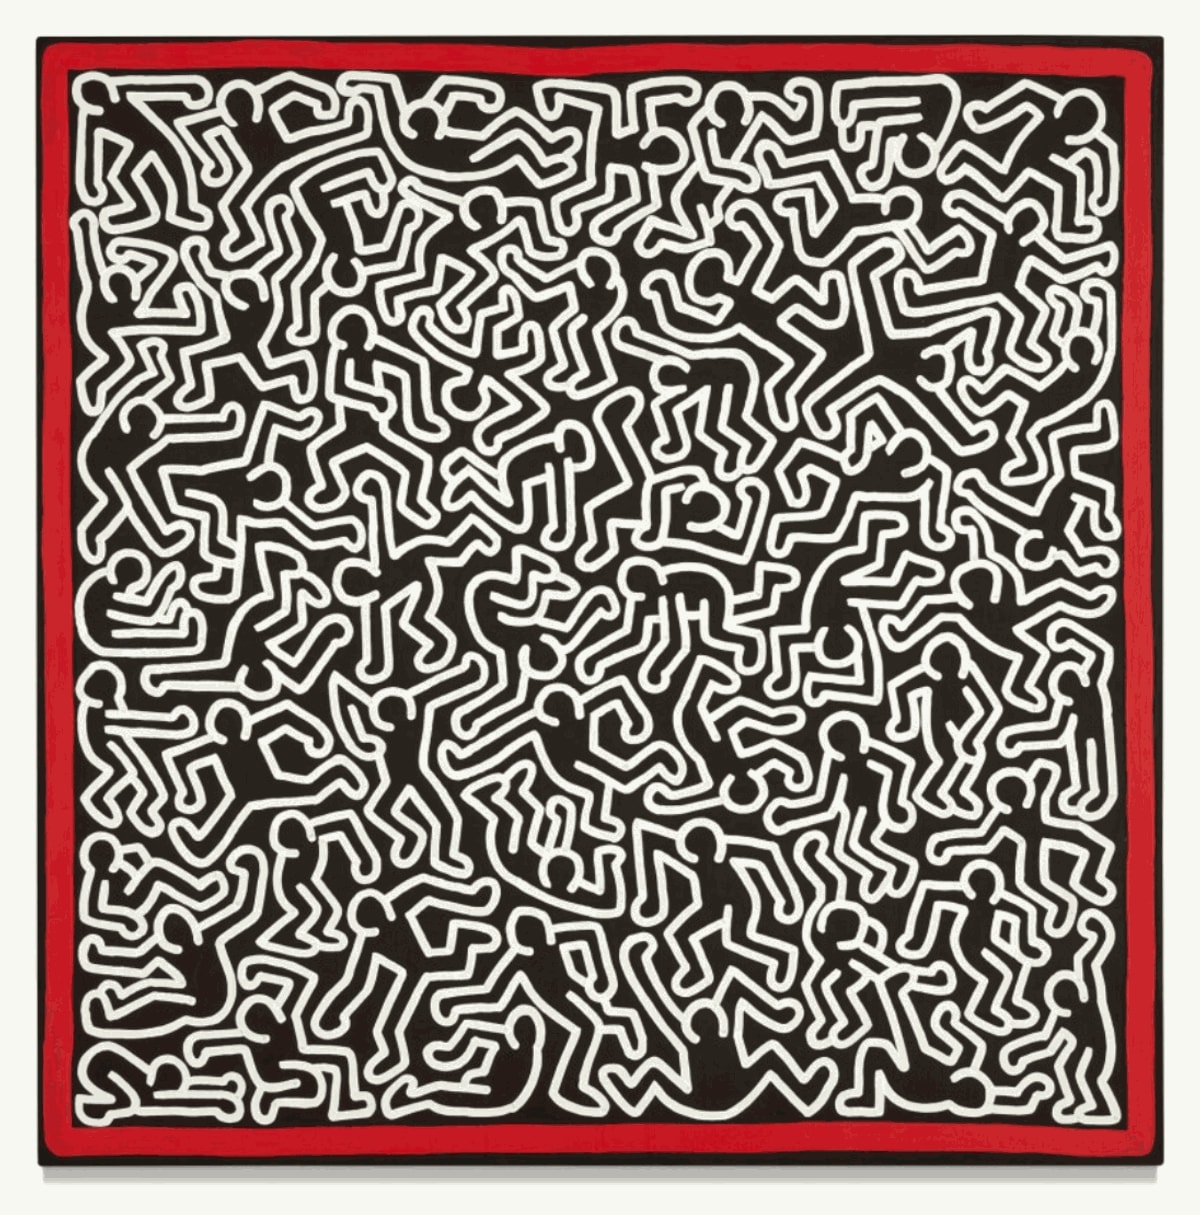 Untitled, 1986 Keith Haring